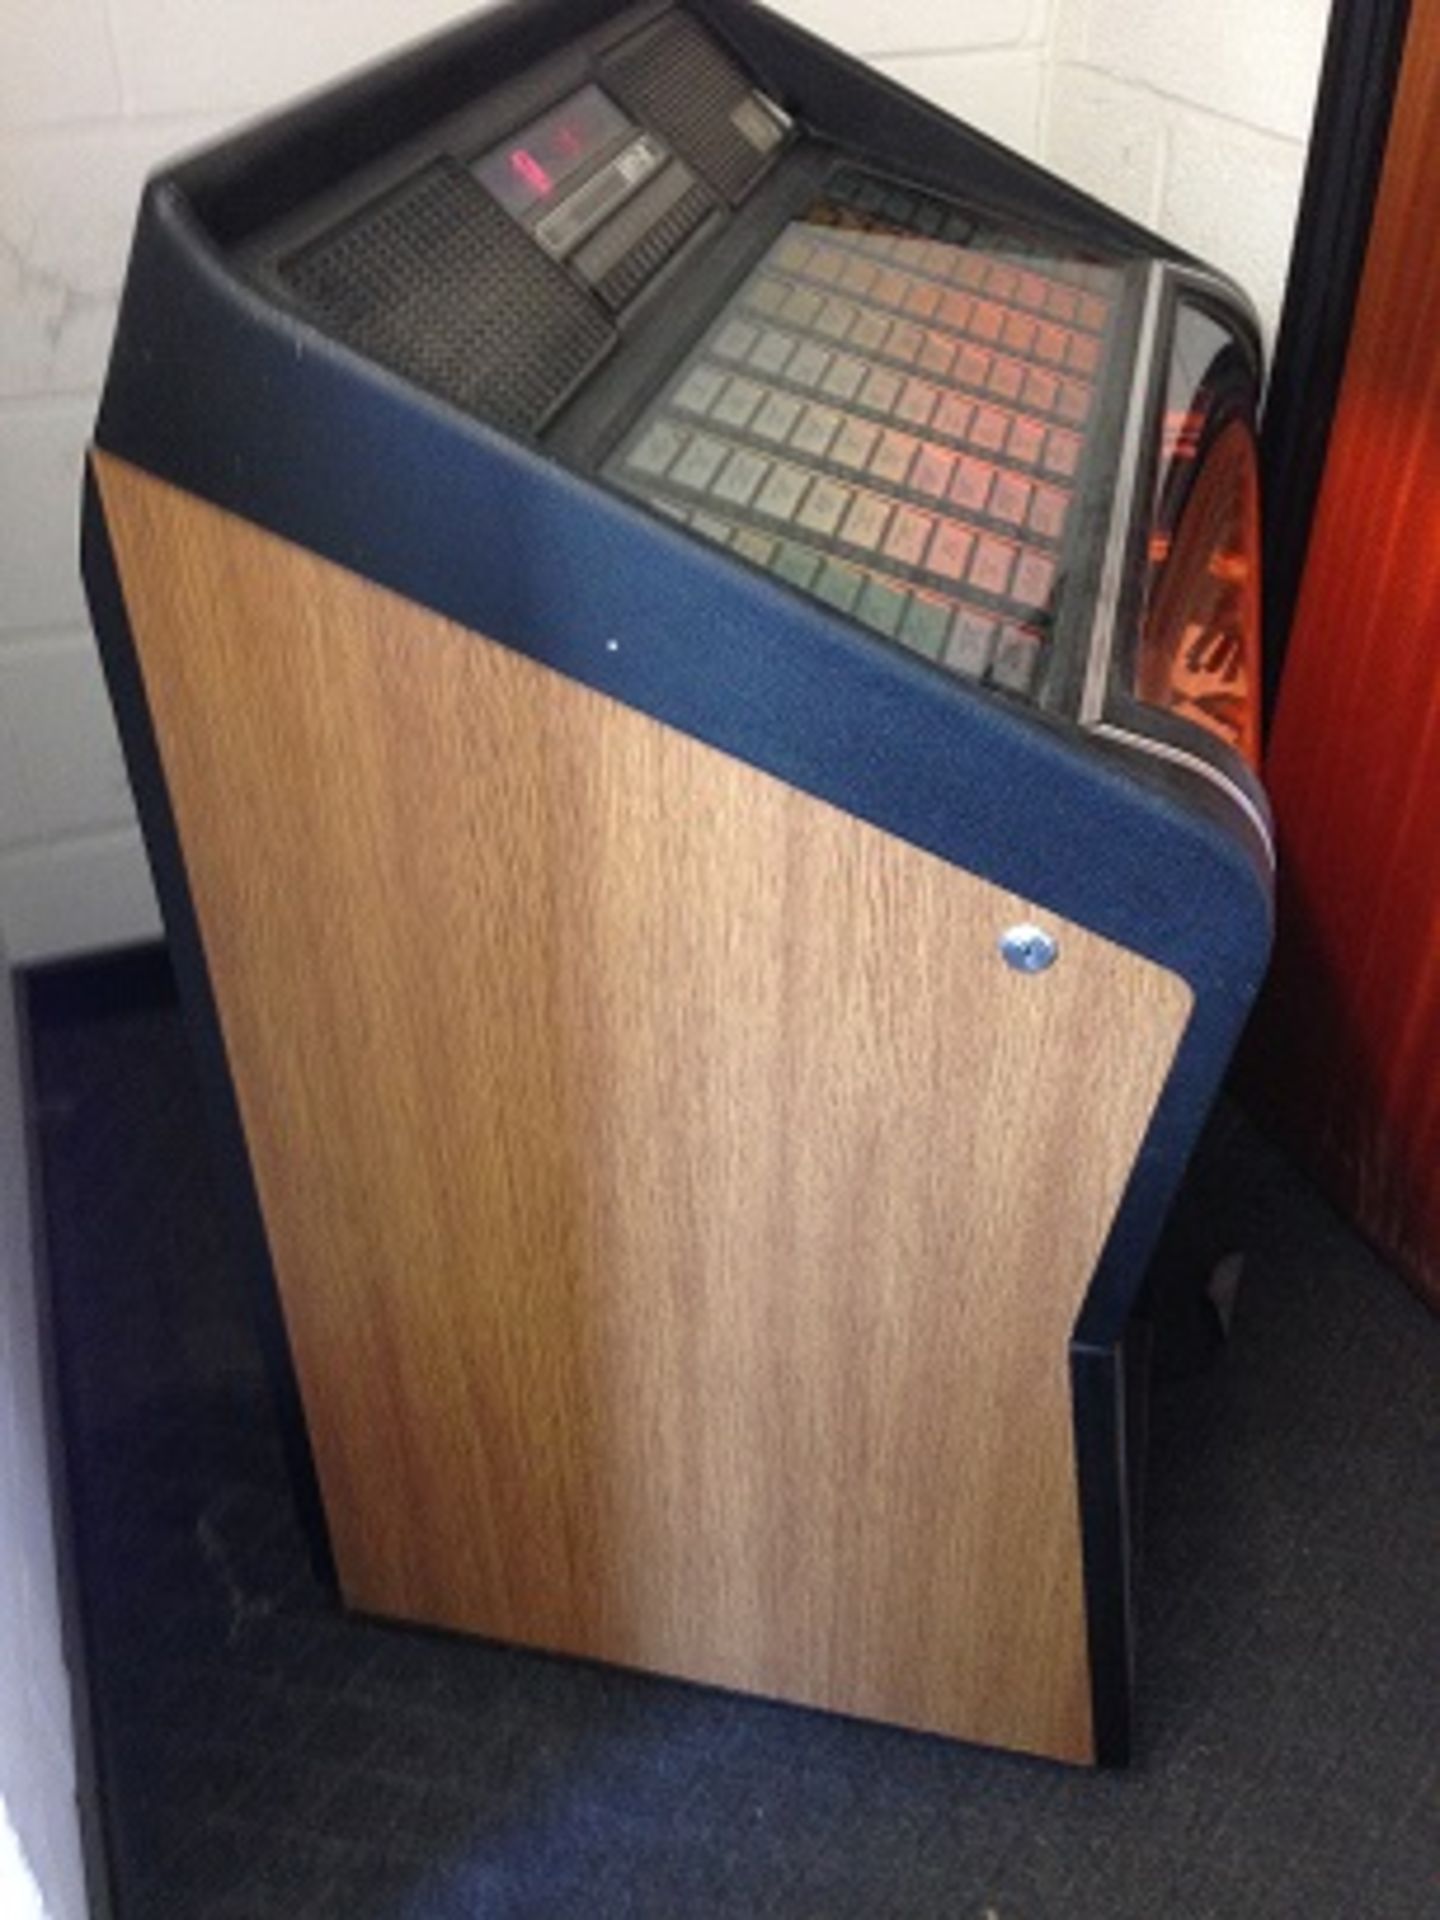 NSM Juke Box – Vinyl Records – Good Condition  & complete with Vinyl Records Requires Servicing to - Image 2 of 4